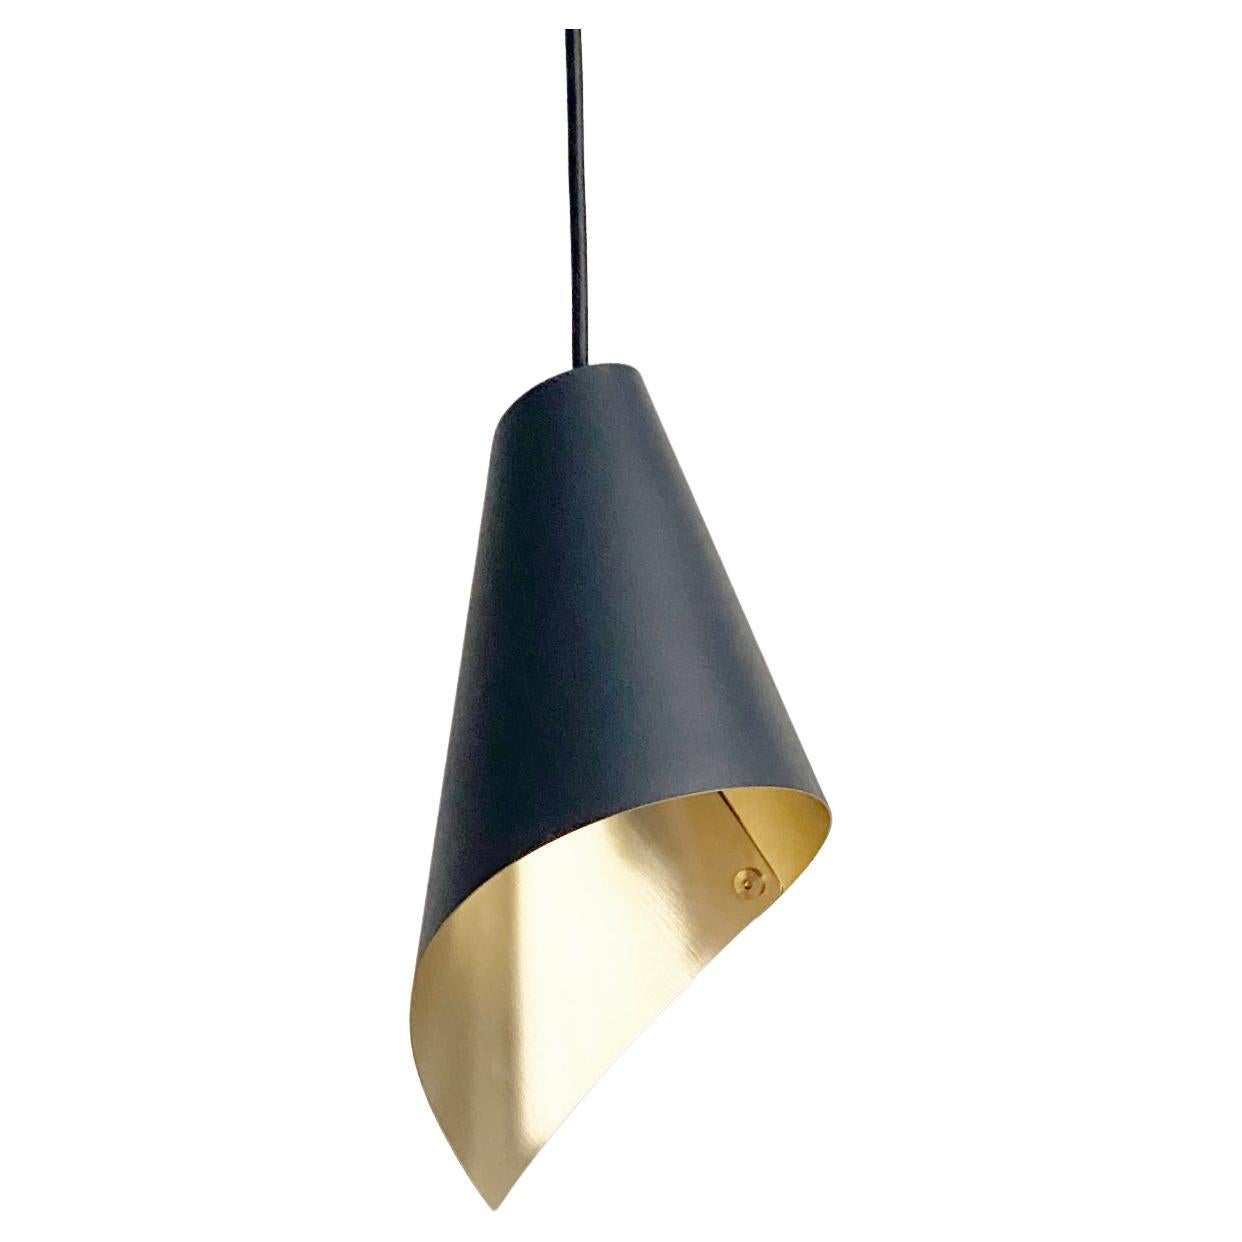 ARC Ceiling Light Pendant in Black and Brushed Brass, Made in Britain